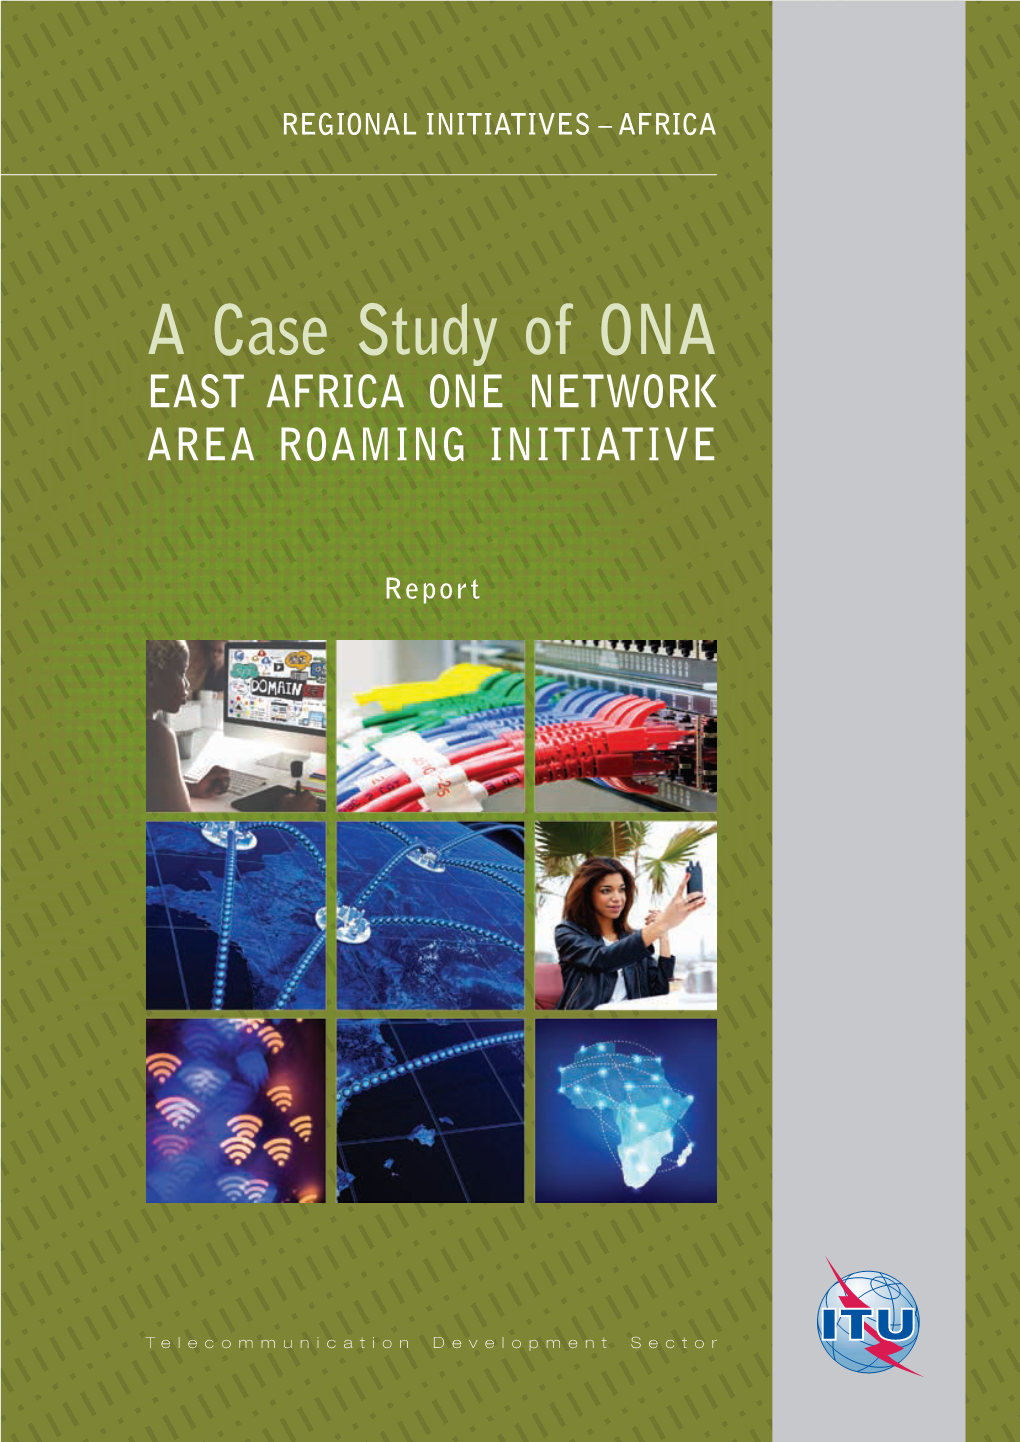 East Africa One Network Area Roaming Initiative